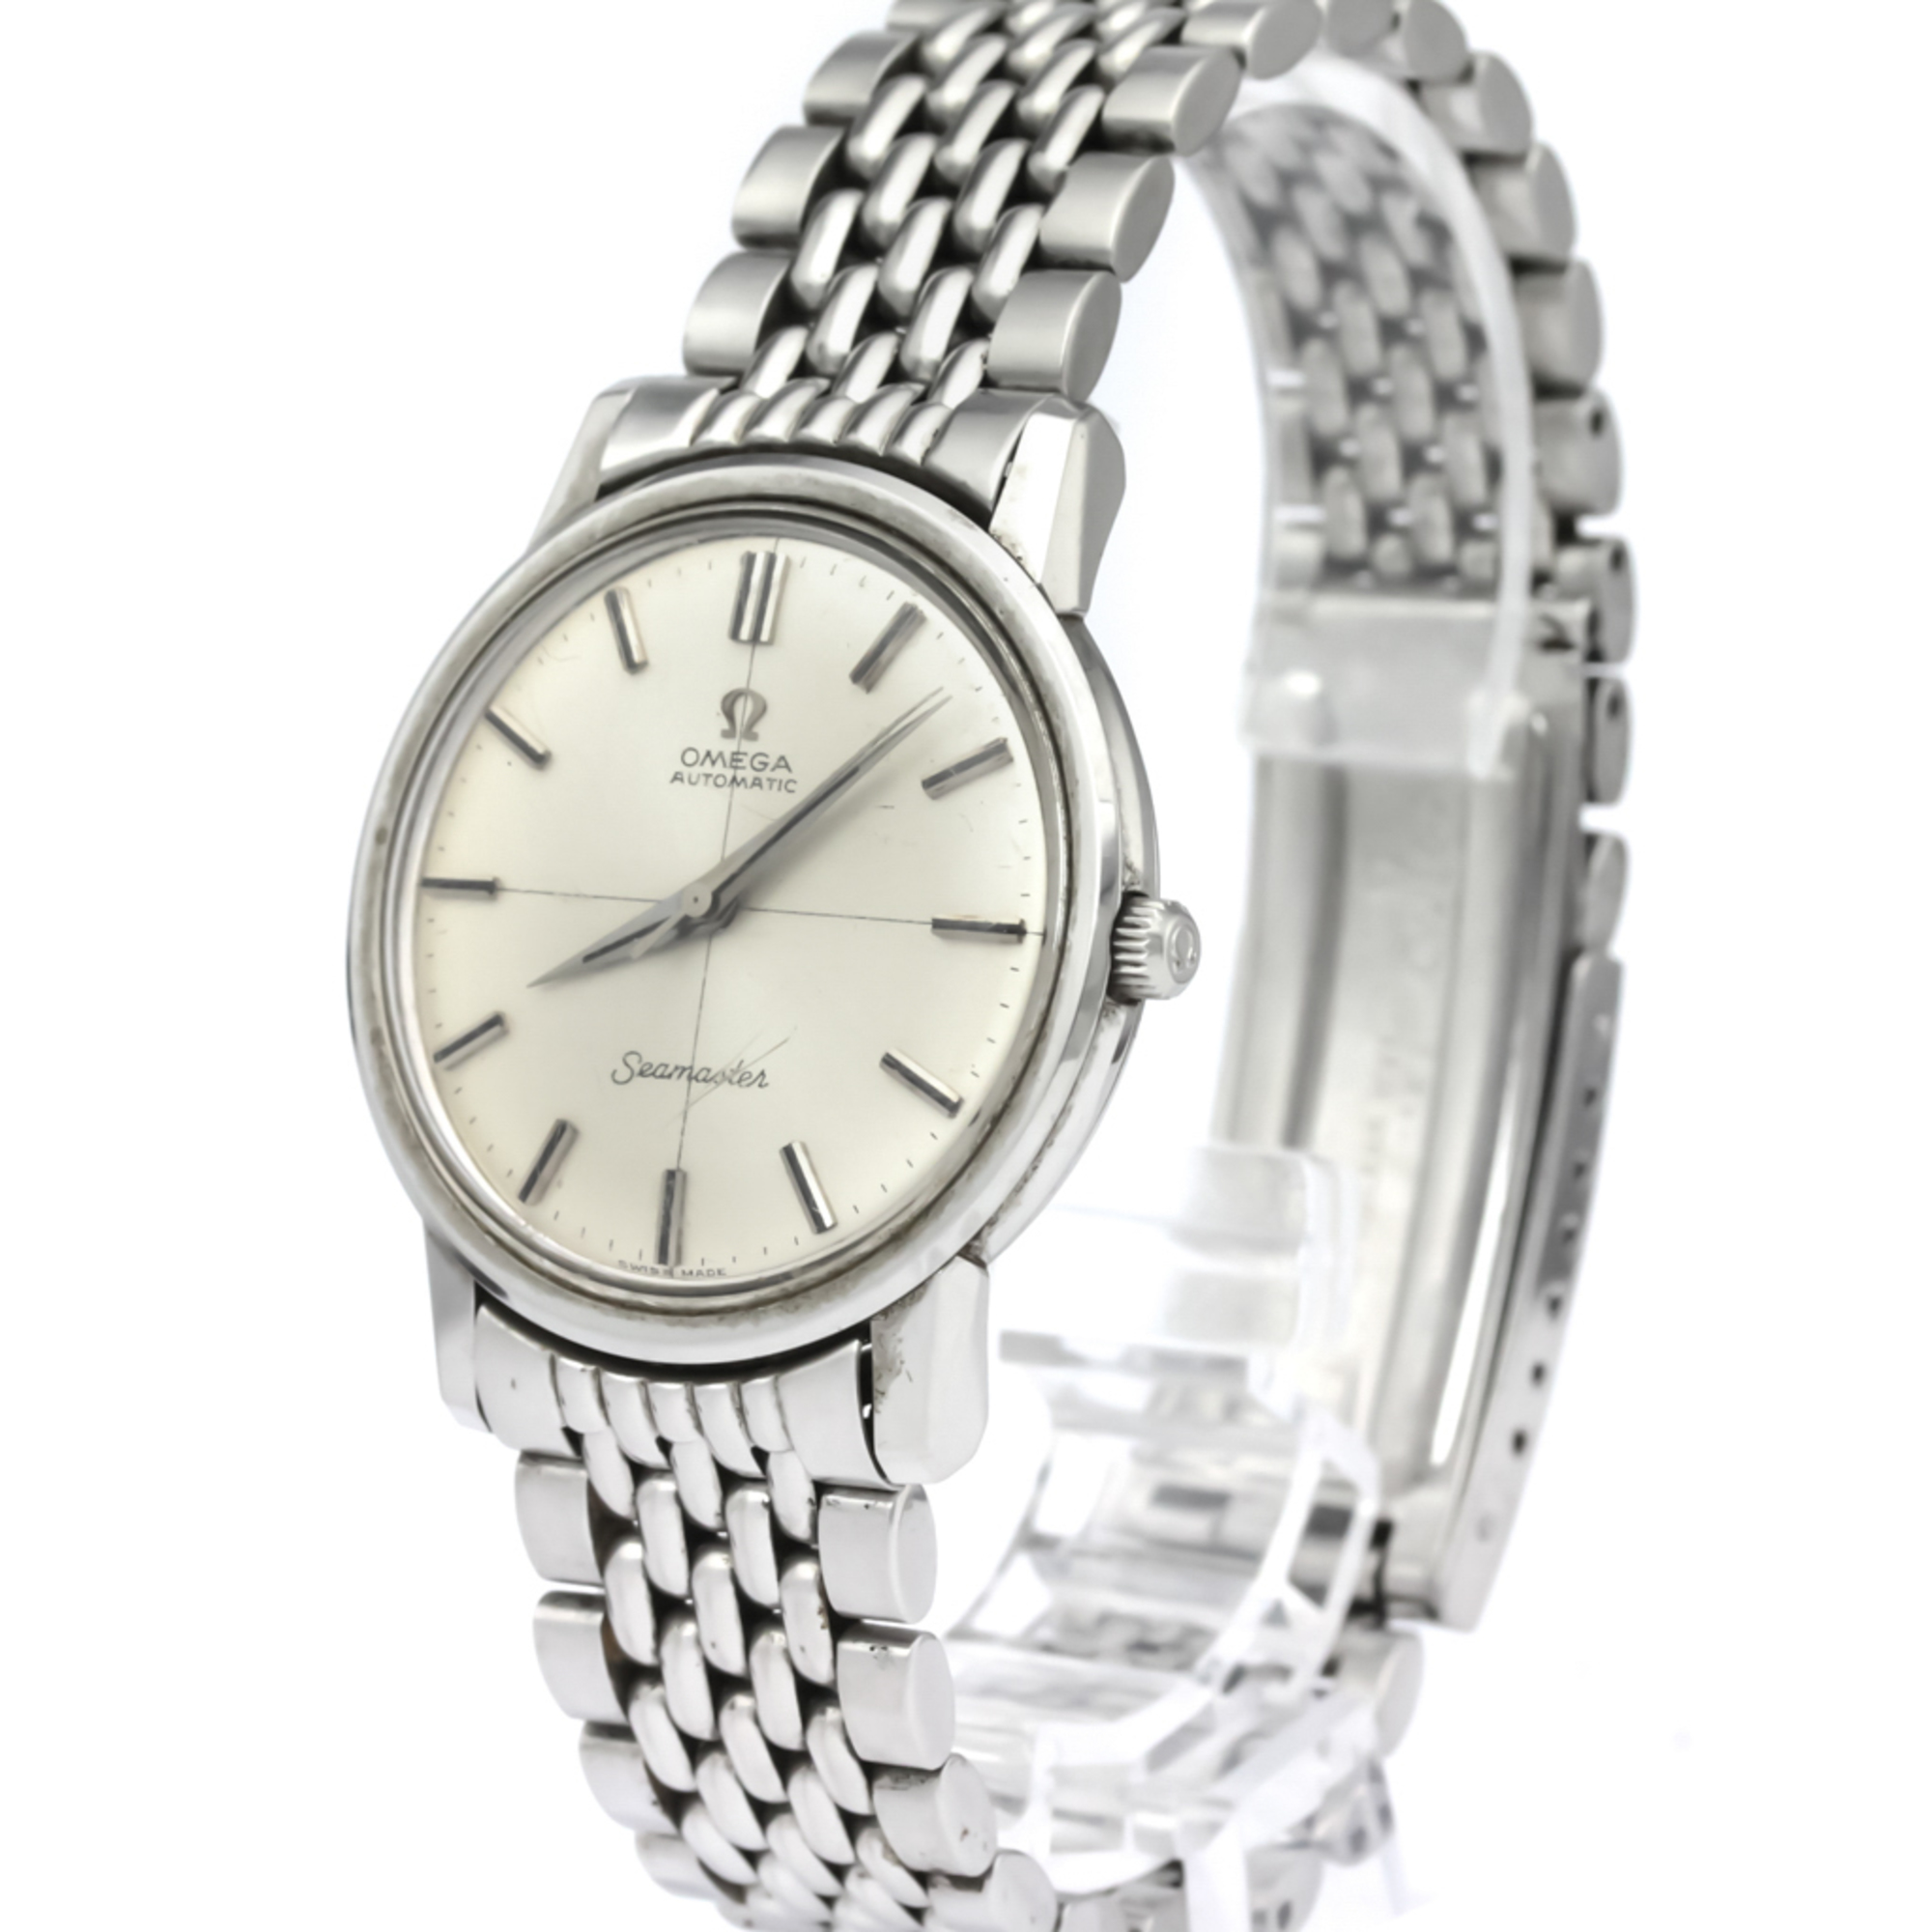 Omega Seamaster Automatic Stainless Steel Men's Dress Watch 165.003